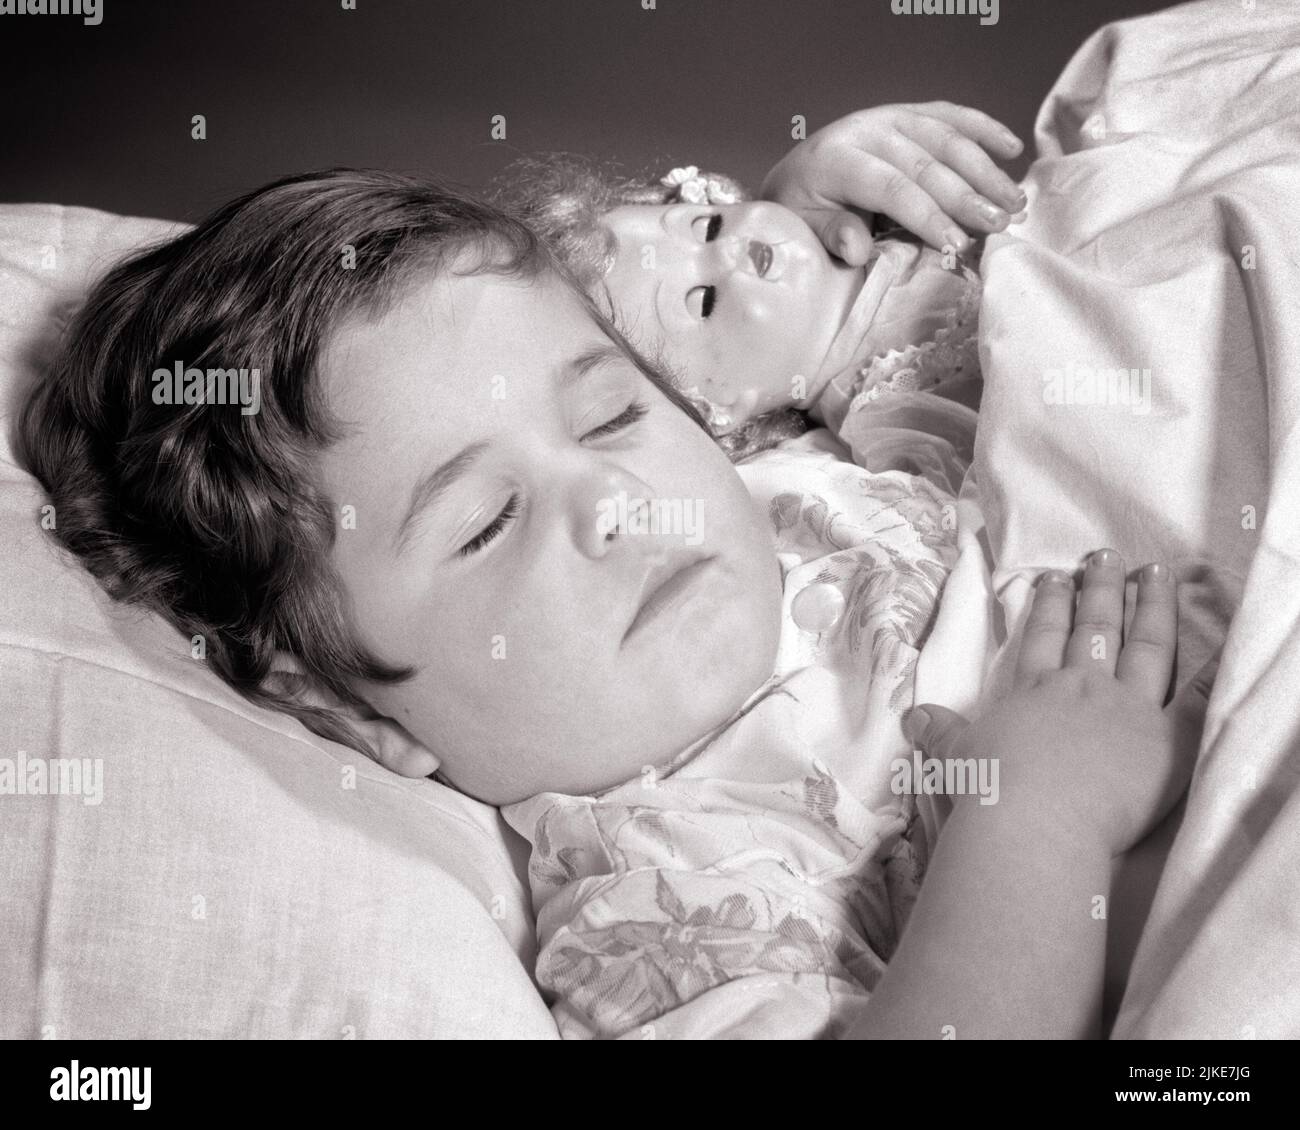 1960s BRUNETTE GIRL SLEEPING PEACEFULLY IN BED WITH ARM WRAPPED AROUND HOLDING HER DOLL - j1637 HAR001 HARS RELAXATION BLACK AND WHITE CAUCASIAN ETHNICITY HAR001 OLD FASHIONED Stock Photo